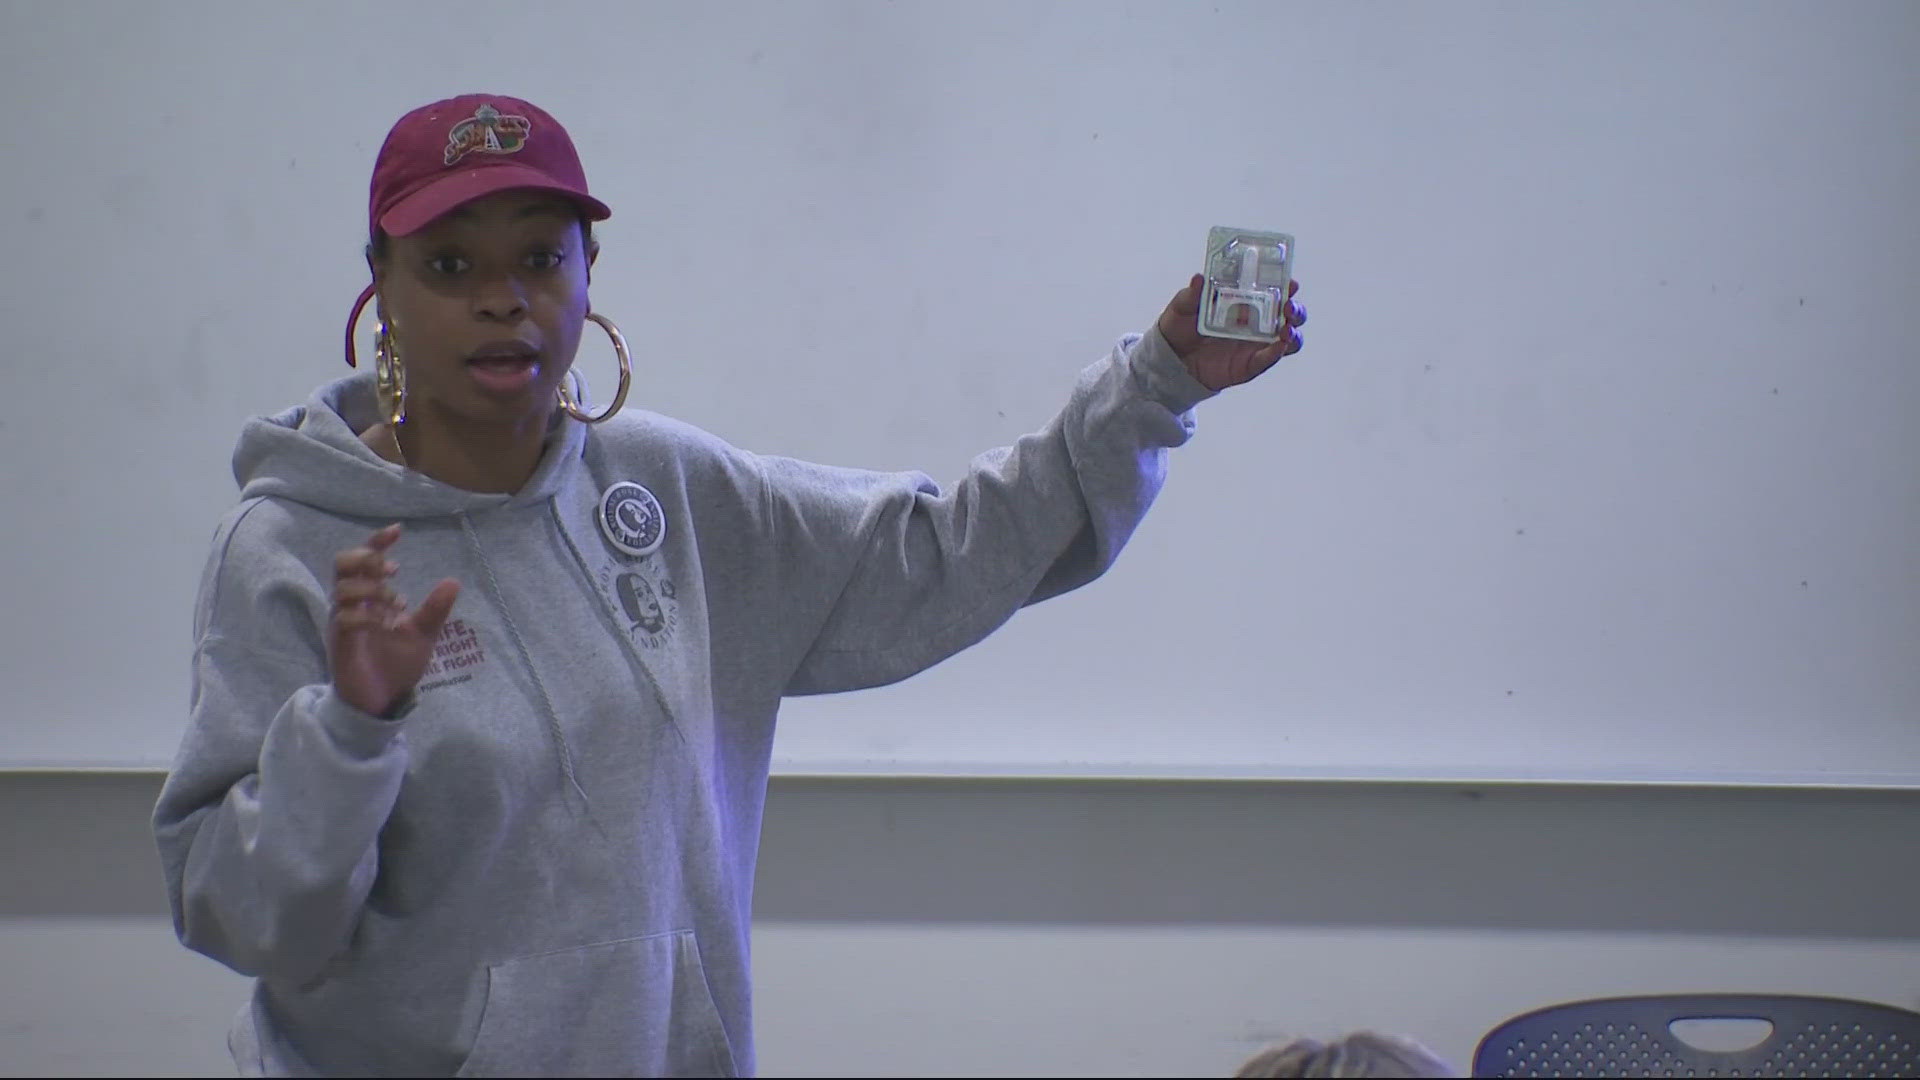 After her mom died of fentanyl poisoning, a local woman is working to spread awareness, holding a Narcan training Saturday at Portland Community College.